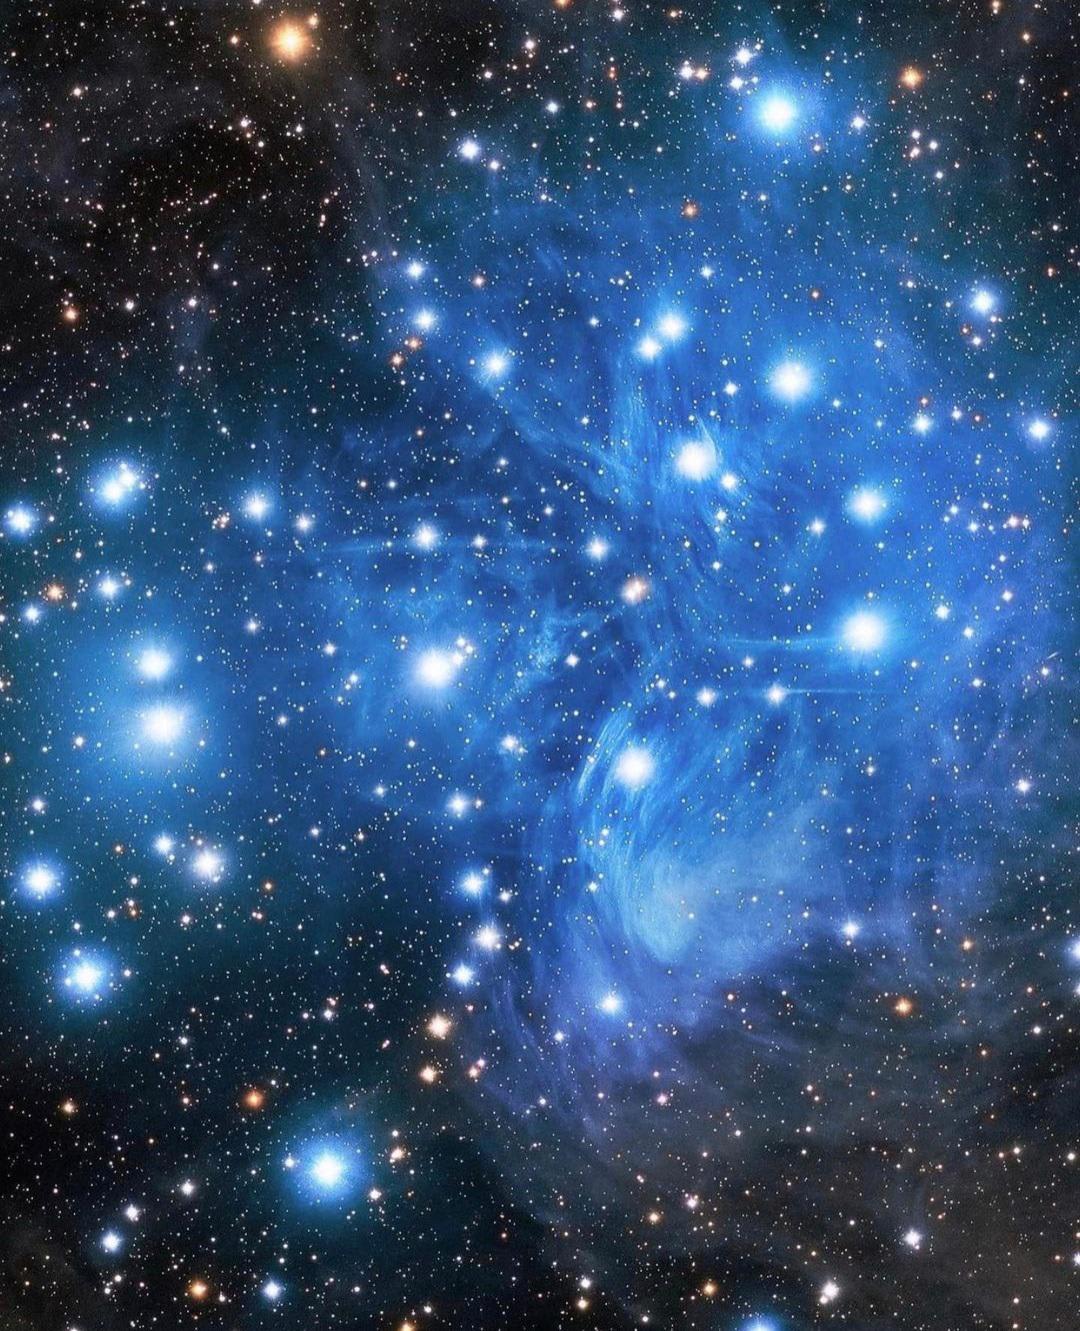 The Pleiades Star Cluster, aka The Seven Sisters, and Messier 45.